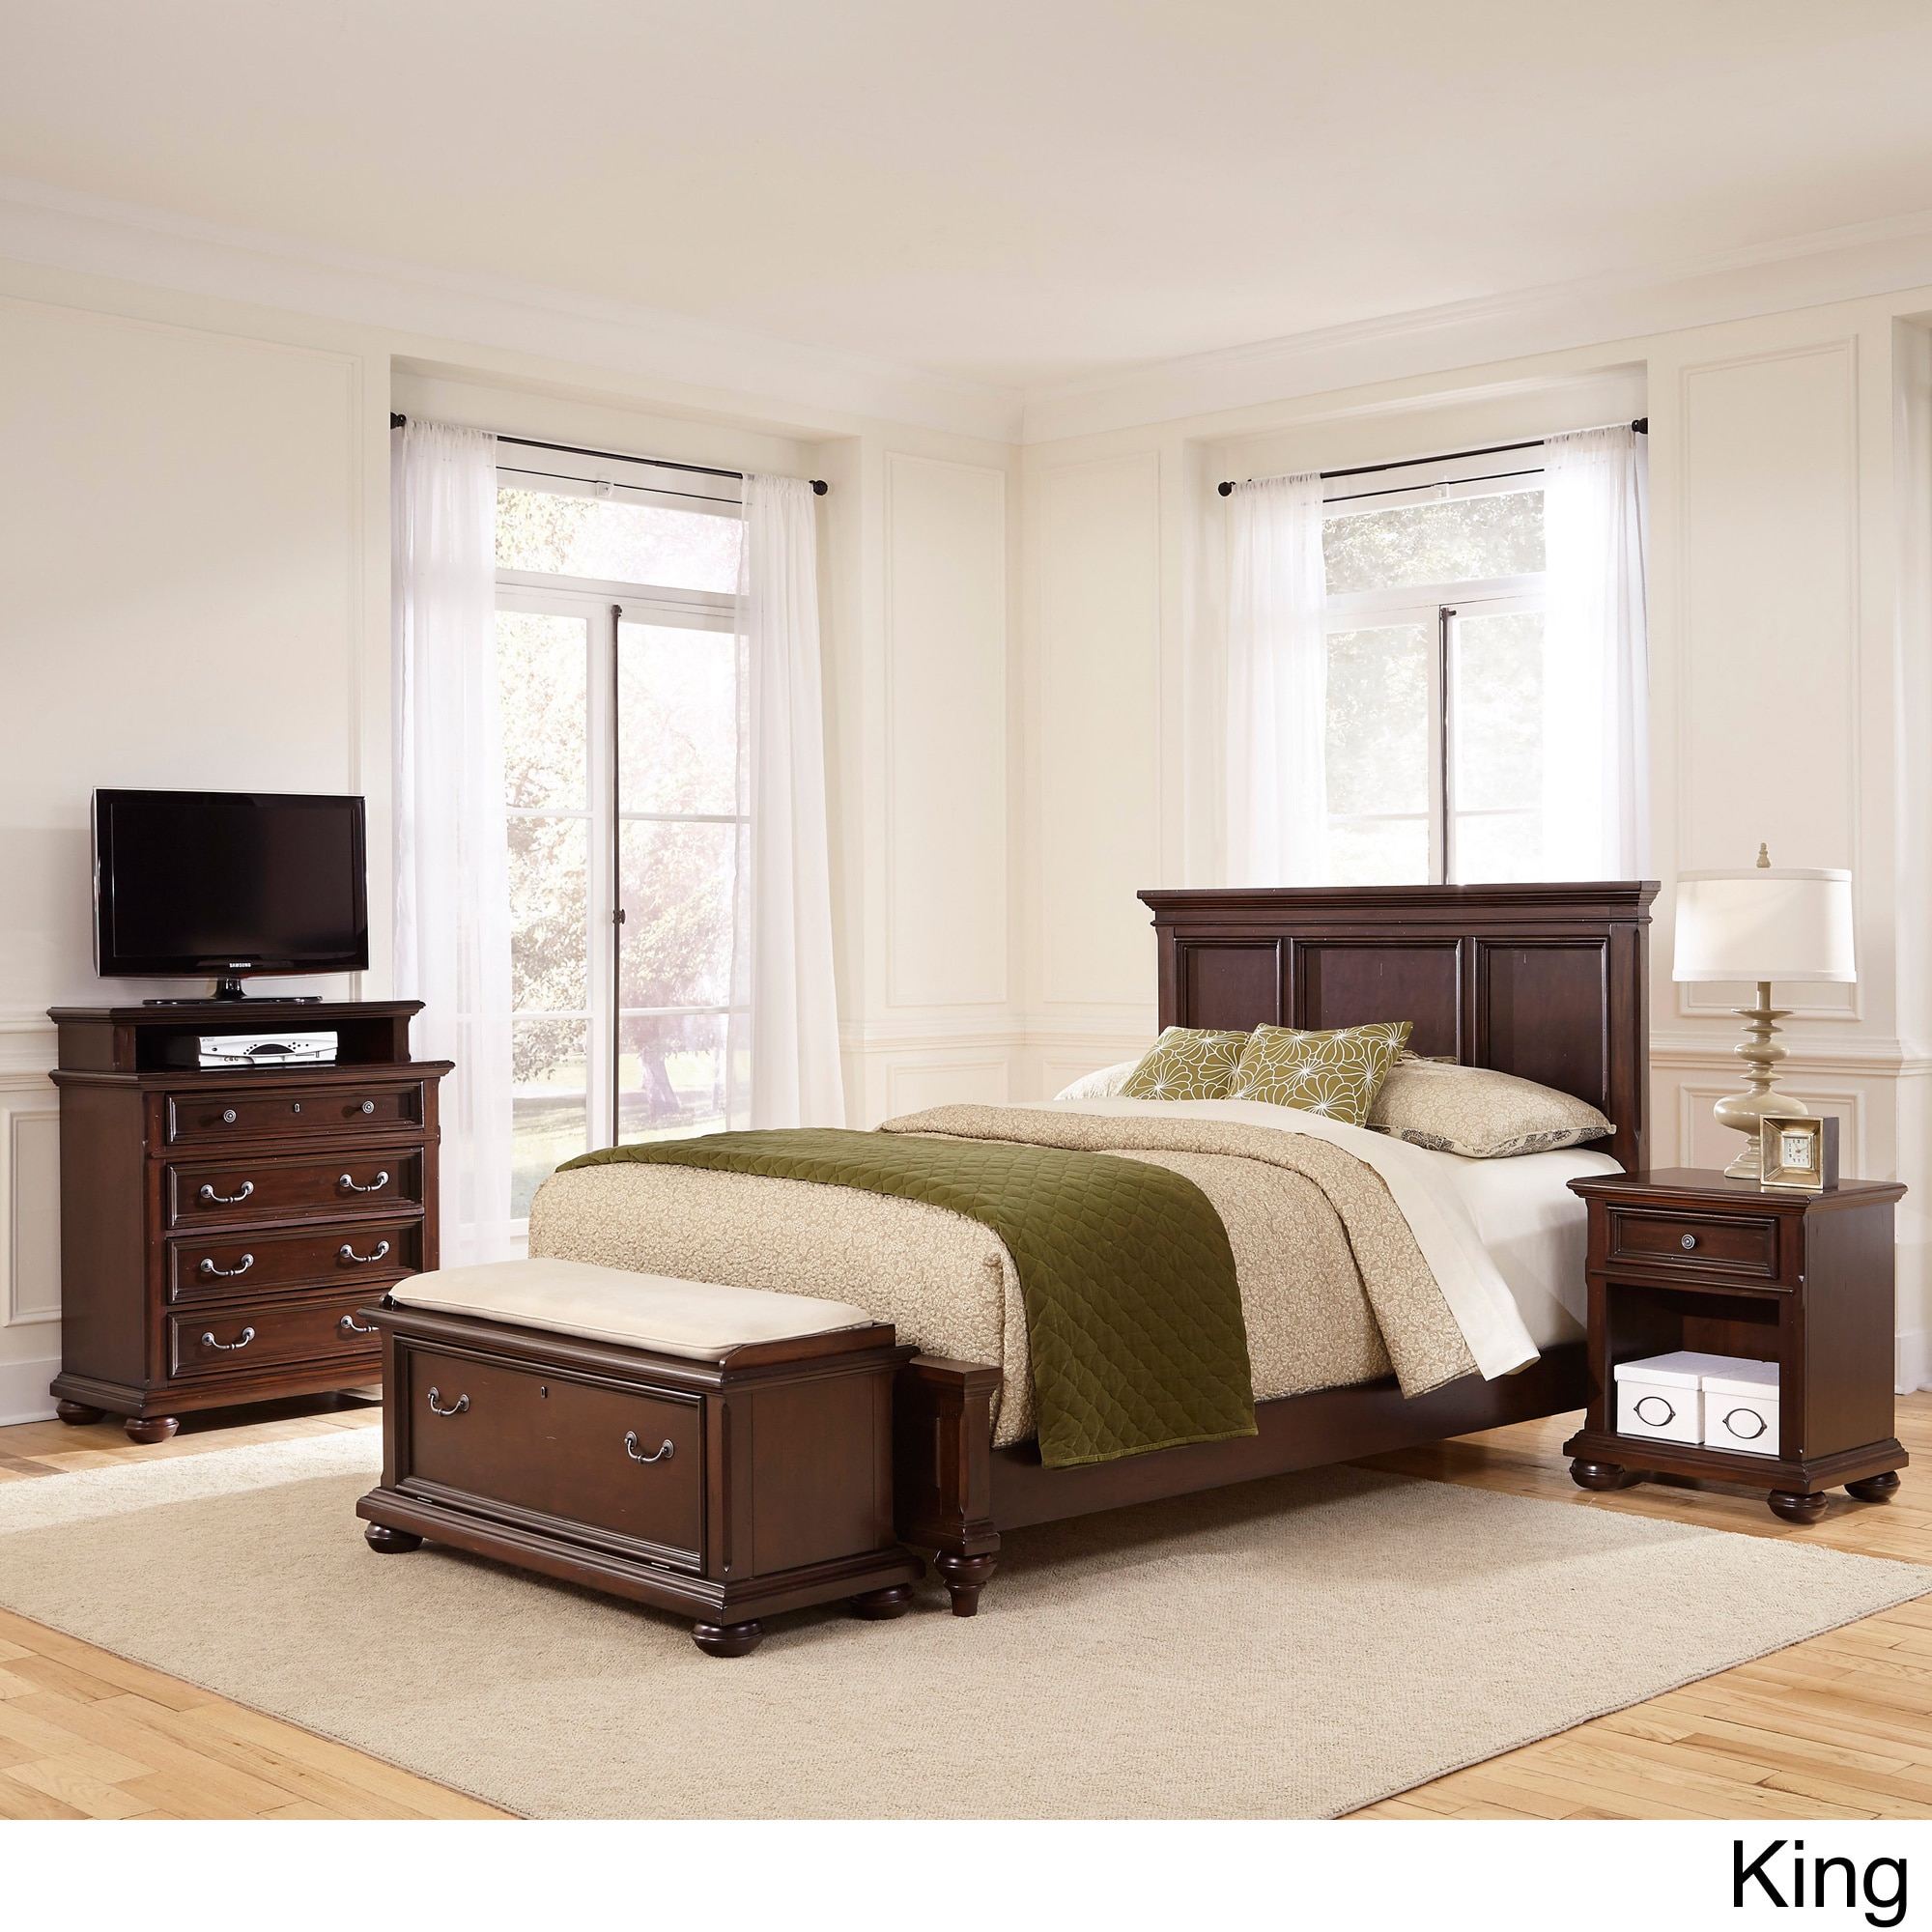 Colonial Classic Dark Cherry 4 Piece Bedroom Set By Home Styles